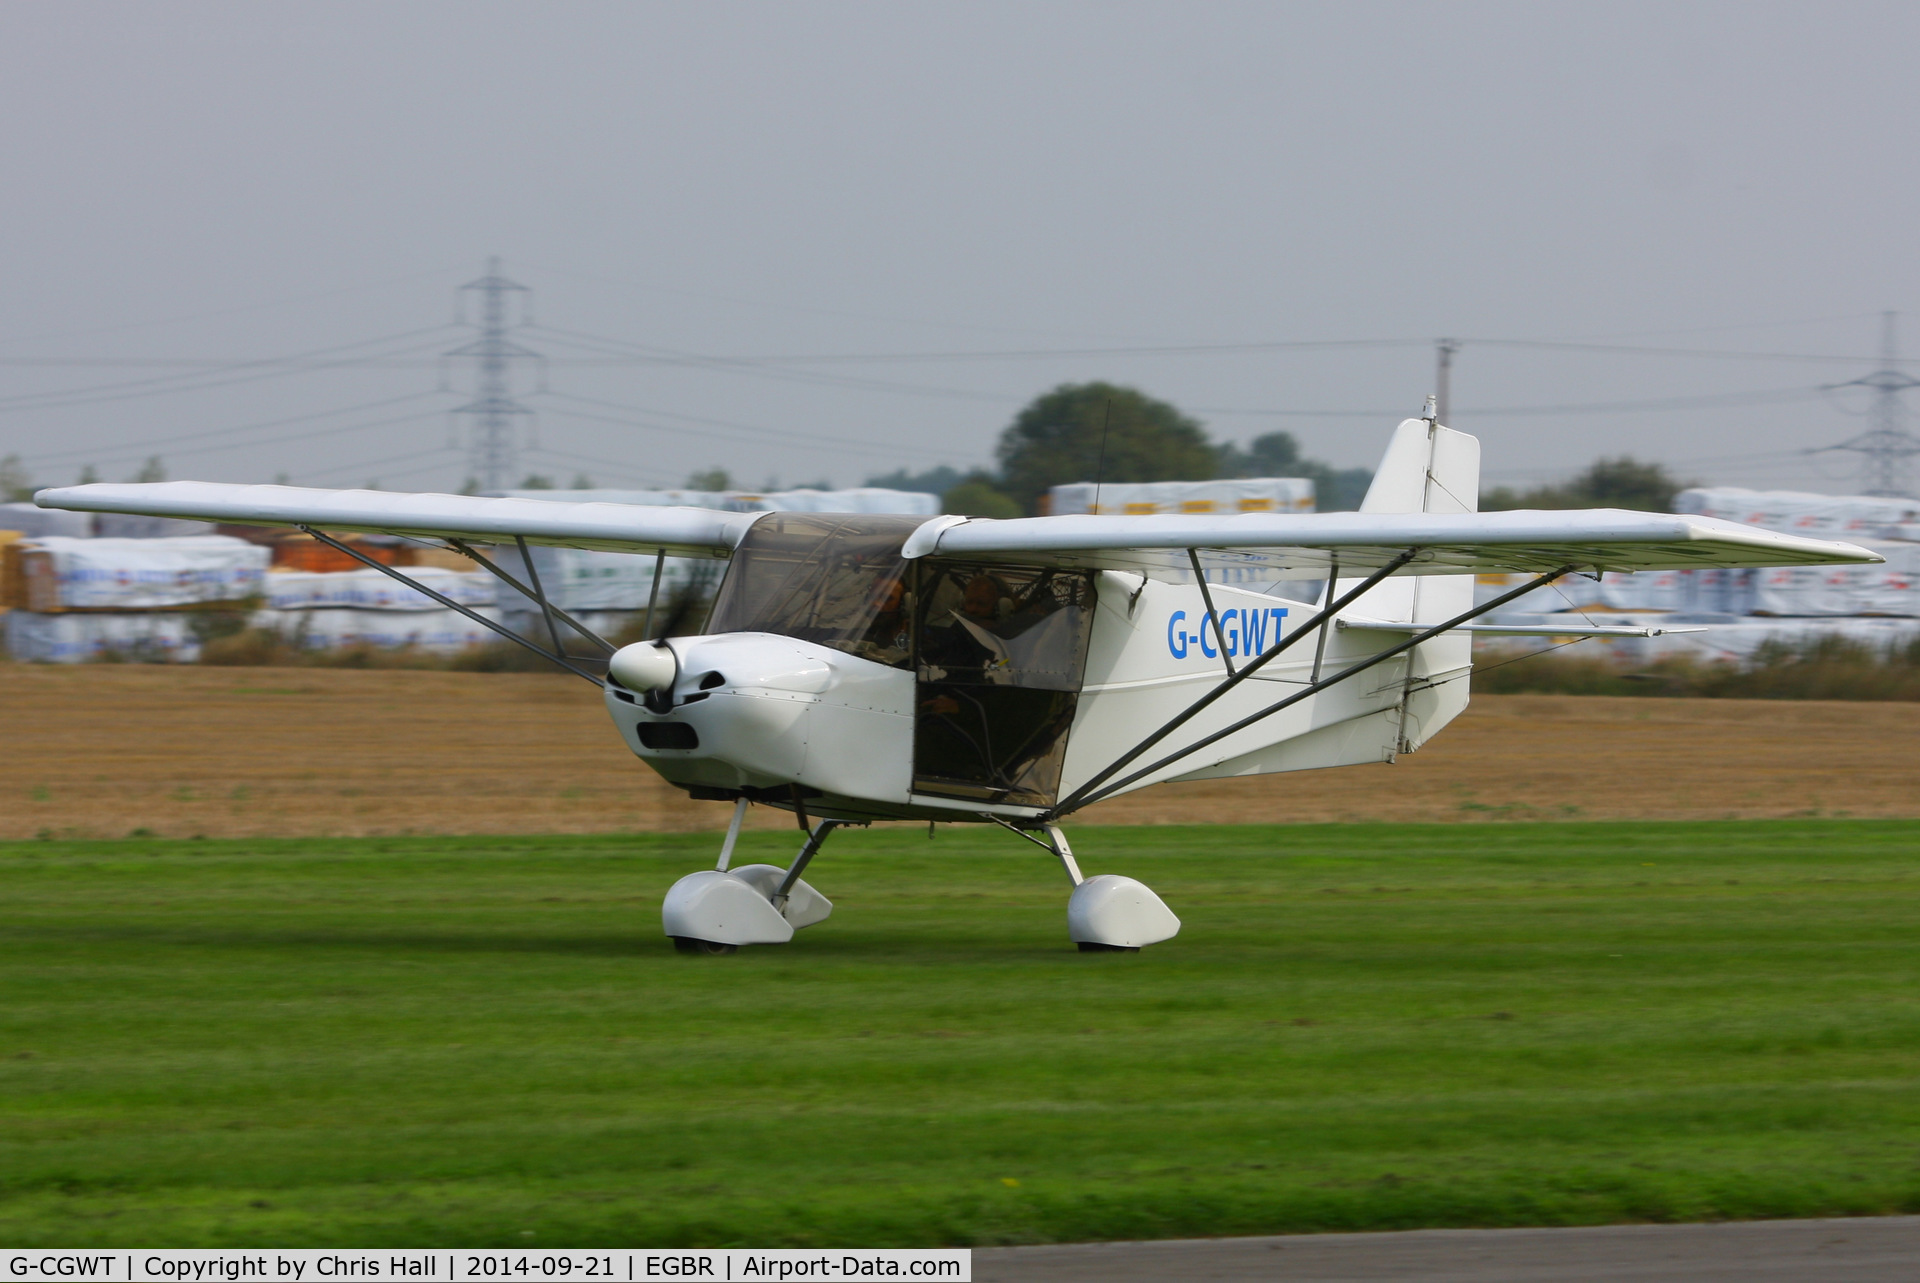 G-CGWT, 2008 Best Off SkyRanger Swift 912(1) C/N BMAA/HB/567, at Breighton's Heli Fly-in, 2014